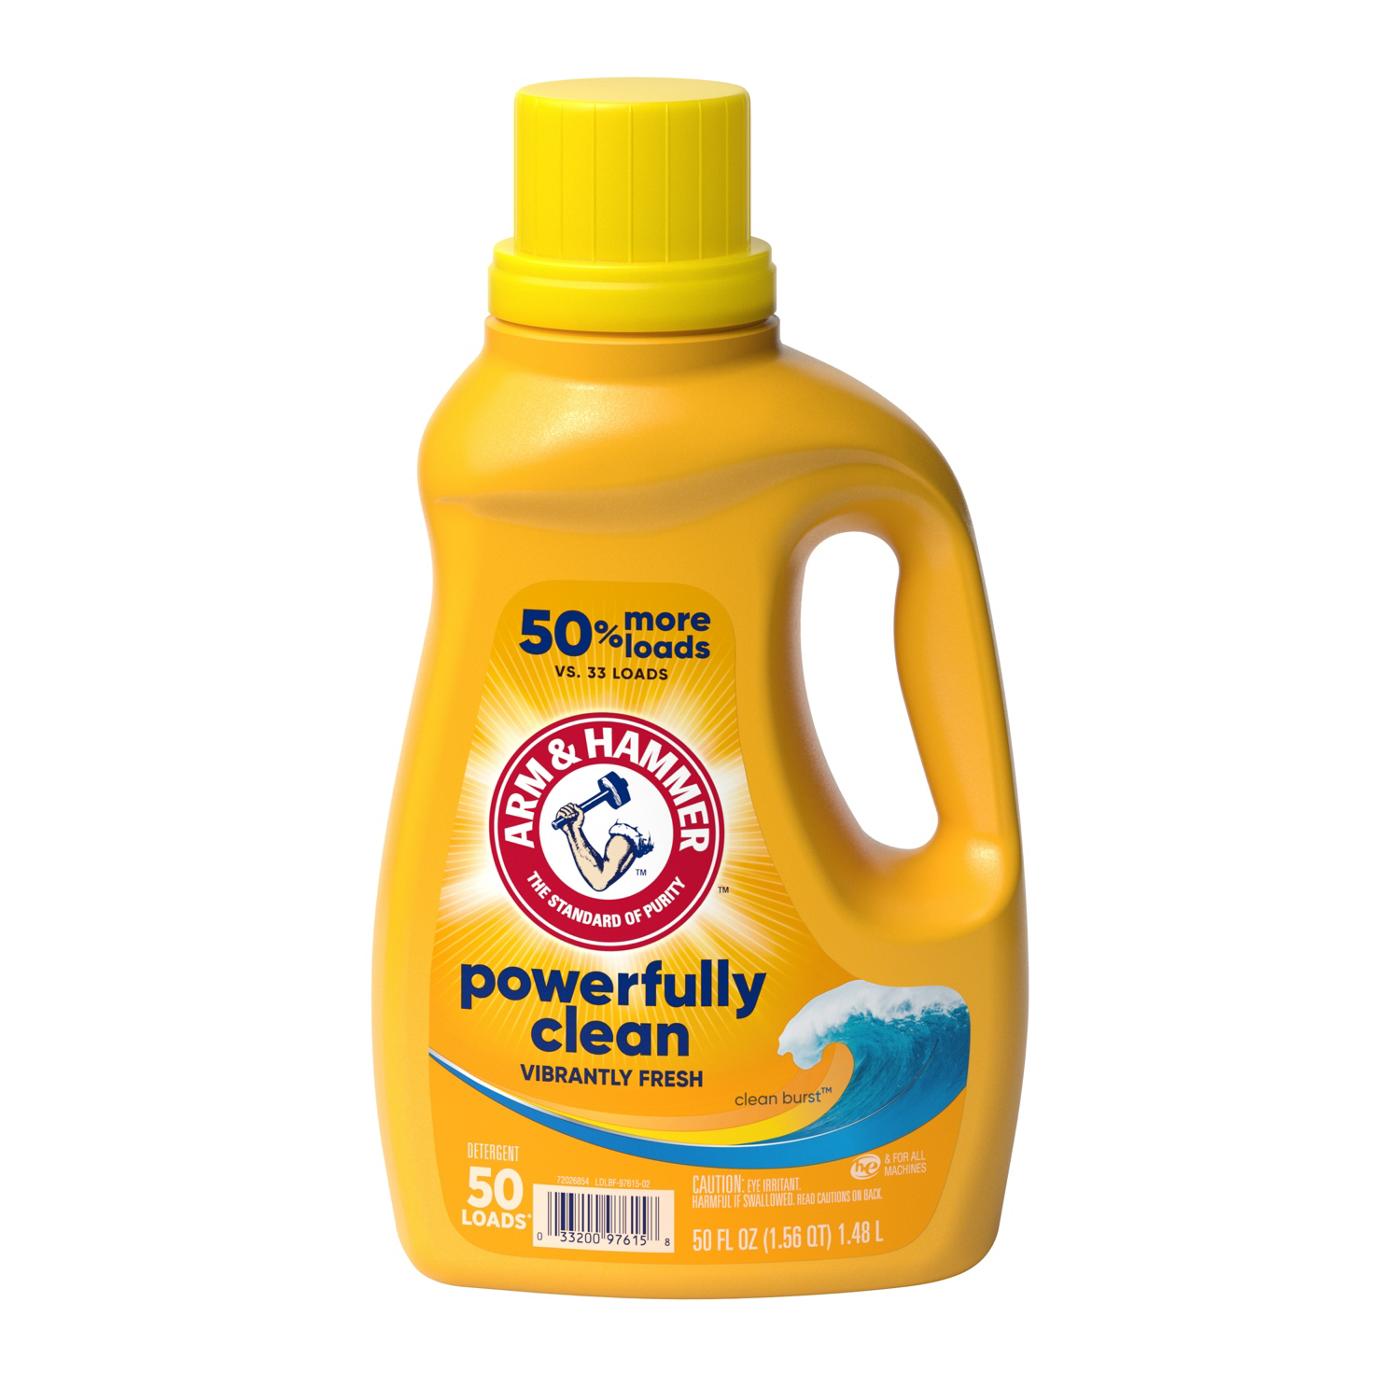 Arm & Hammer Powerfully Clean HE Liquid Laundry Detergent, 50 Loads - Clean Burst; image 1 of 4